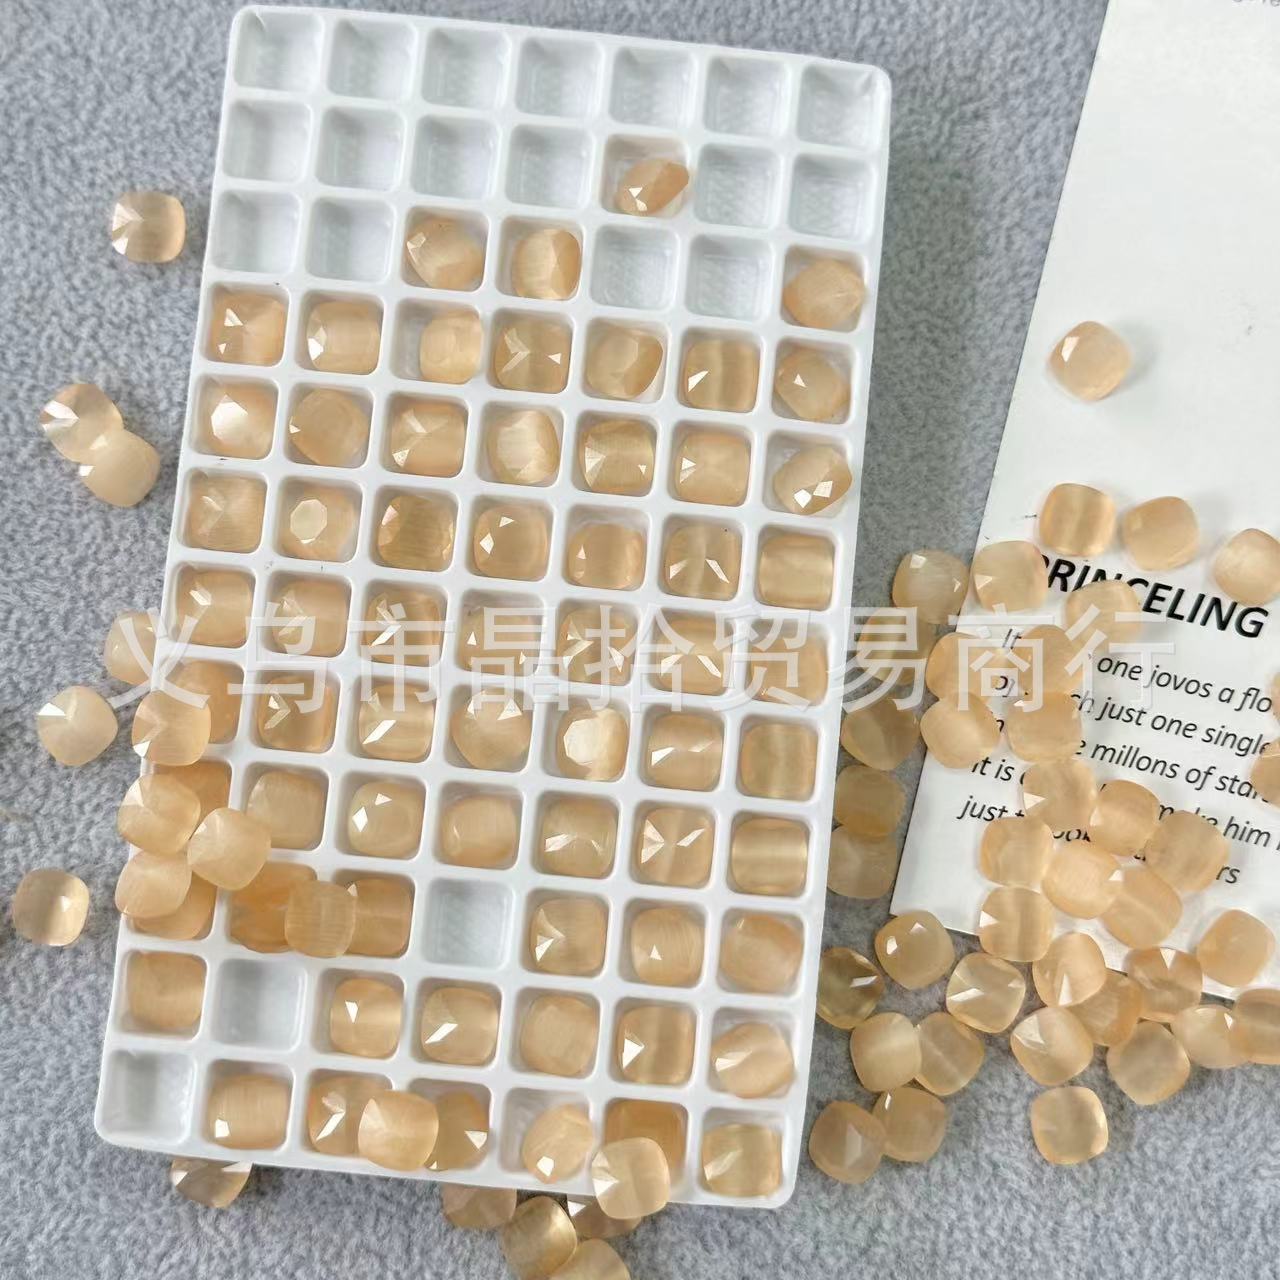 Cat's Eye Jade Surface Protein 8mm Fat Square Color Nail Beauty Rhinestone Ornaments Accessories Factory Wholesale